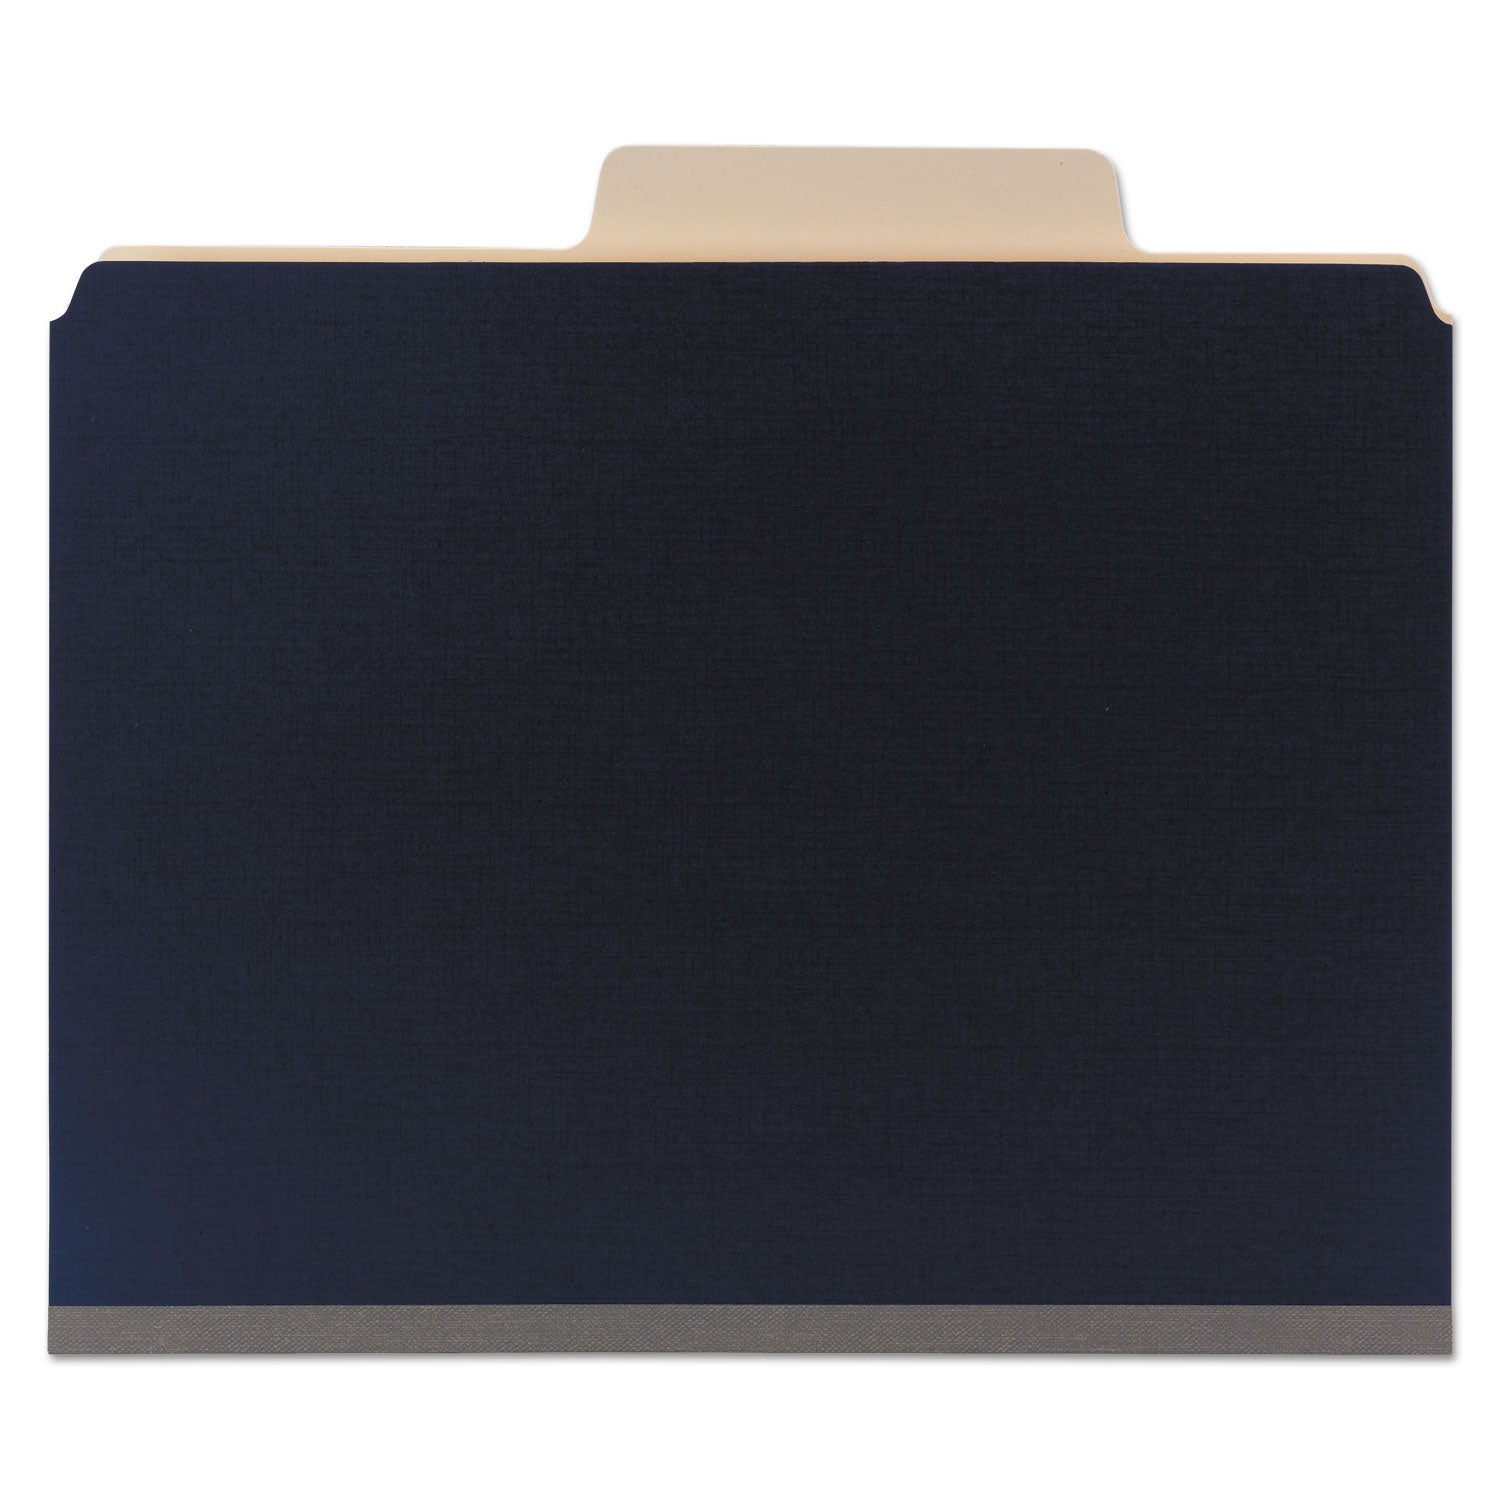 supertab-classification-folders-six-safeshield-fasteners-2-expansion-2-dividers-letter-size-dark-blue-10-box_smd14010 - 8